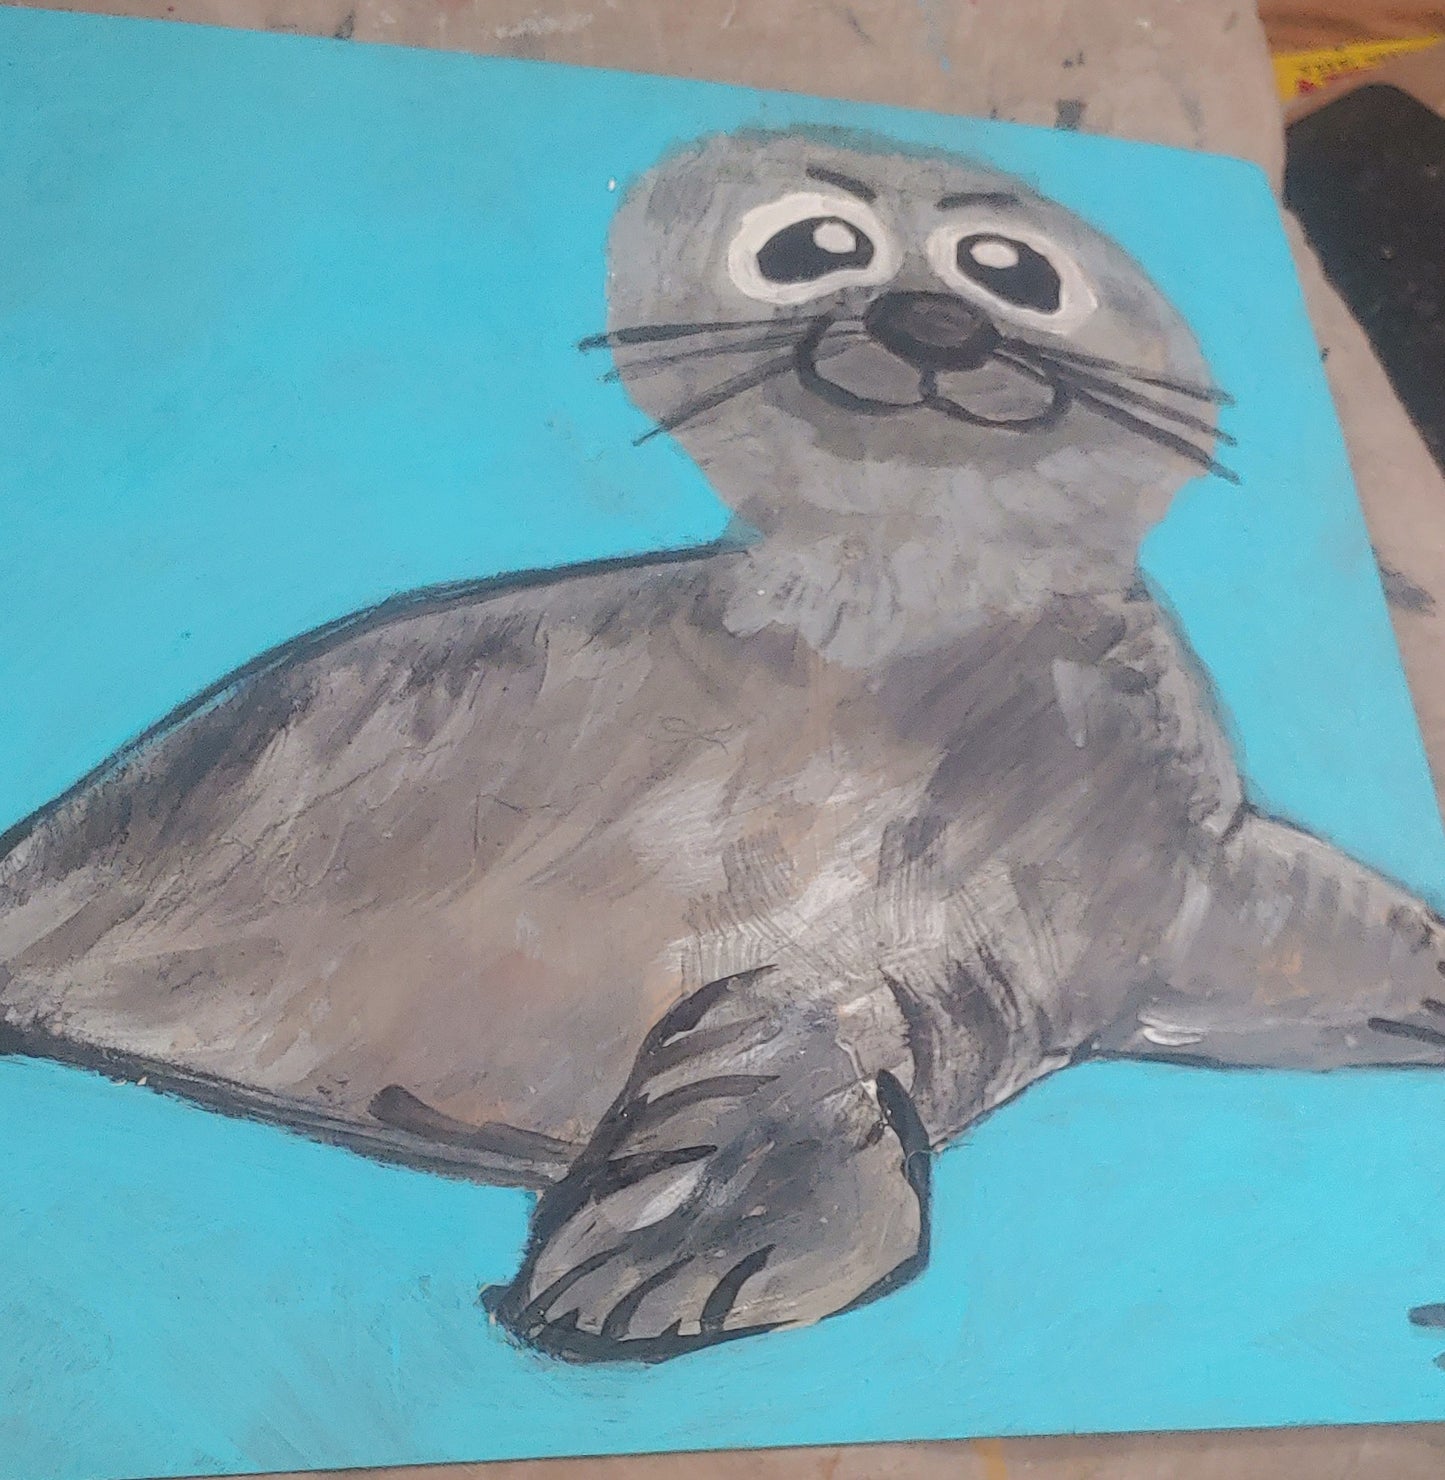 big sale  Was $40 now $15 cute seal pup 12 x 12 inch painting on plywood